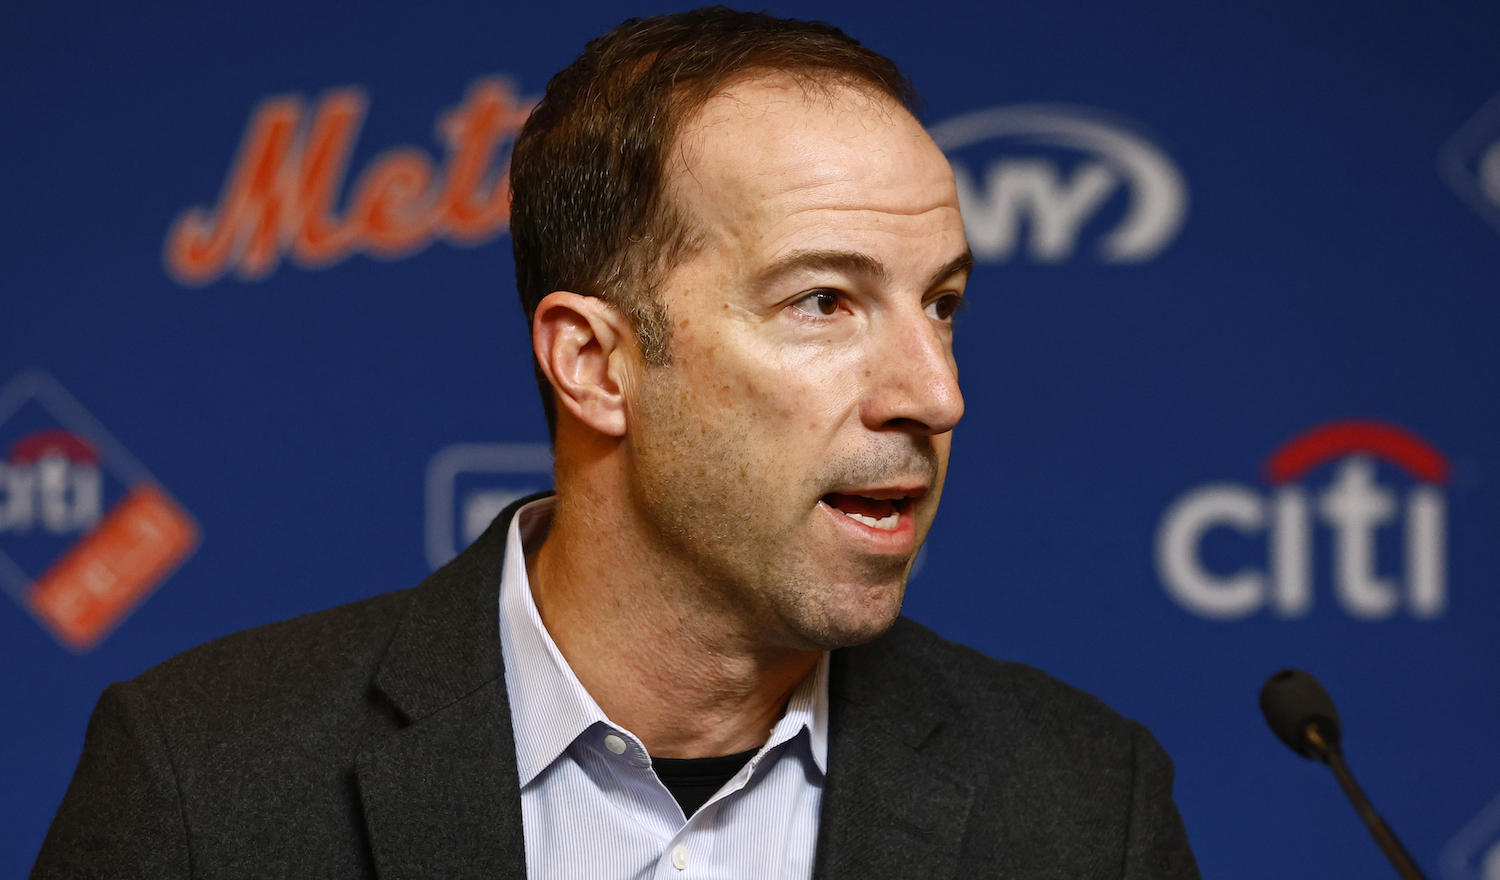 NEW YORK, NY - DECEMBER 20: General manager Billy Eppler of the New York Mets talks during a press conference to introduce pitcher Justin Verlander at Citi Field on December 20, 2022 in New York City. (Photo by Rich Schultz/Getty Images)